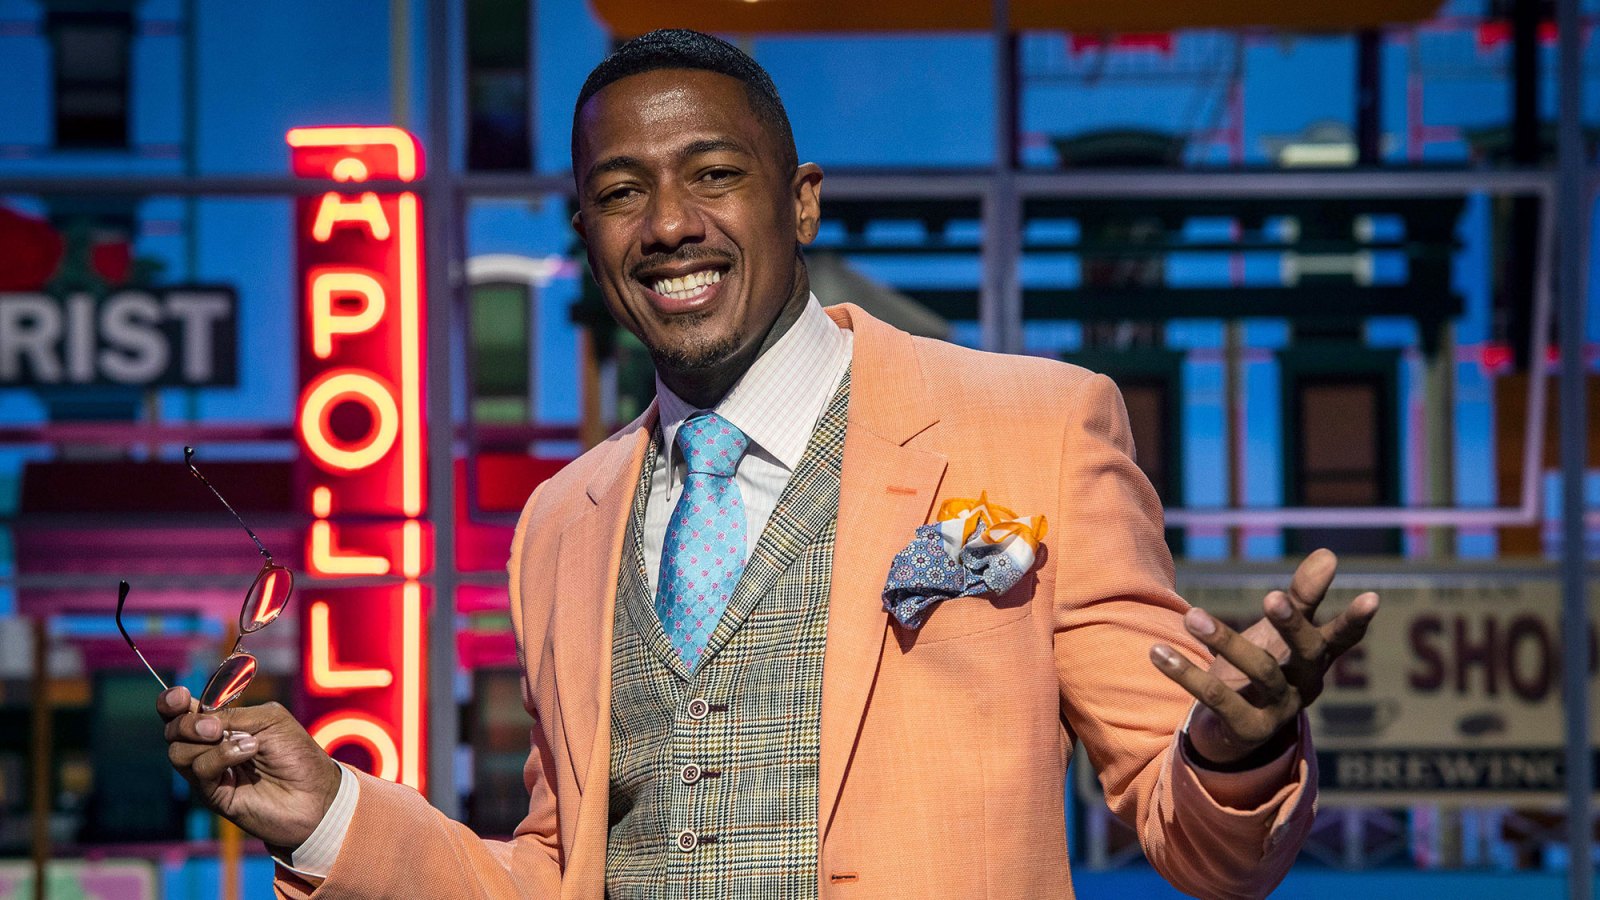 Nick Cannon: My Therapist Says I Should Be Celibate After Having 7 Kids